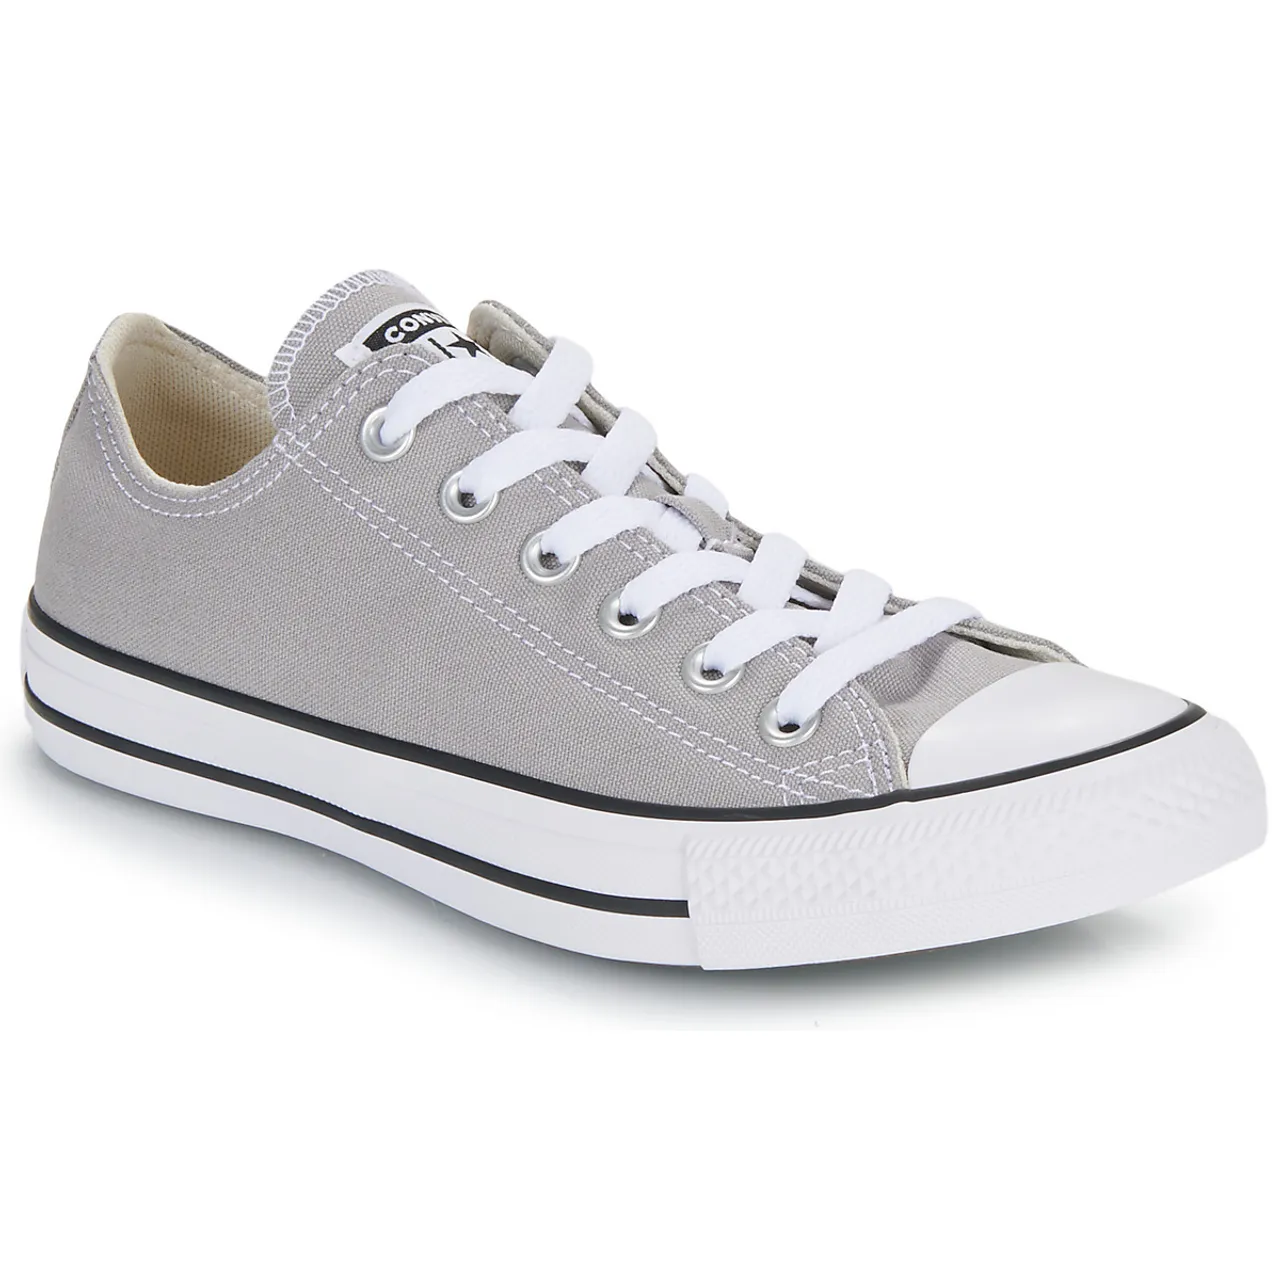 Converse  CHUCK TAYLOR ALL STAR  women's Shoes (Trainers) in Grey